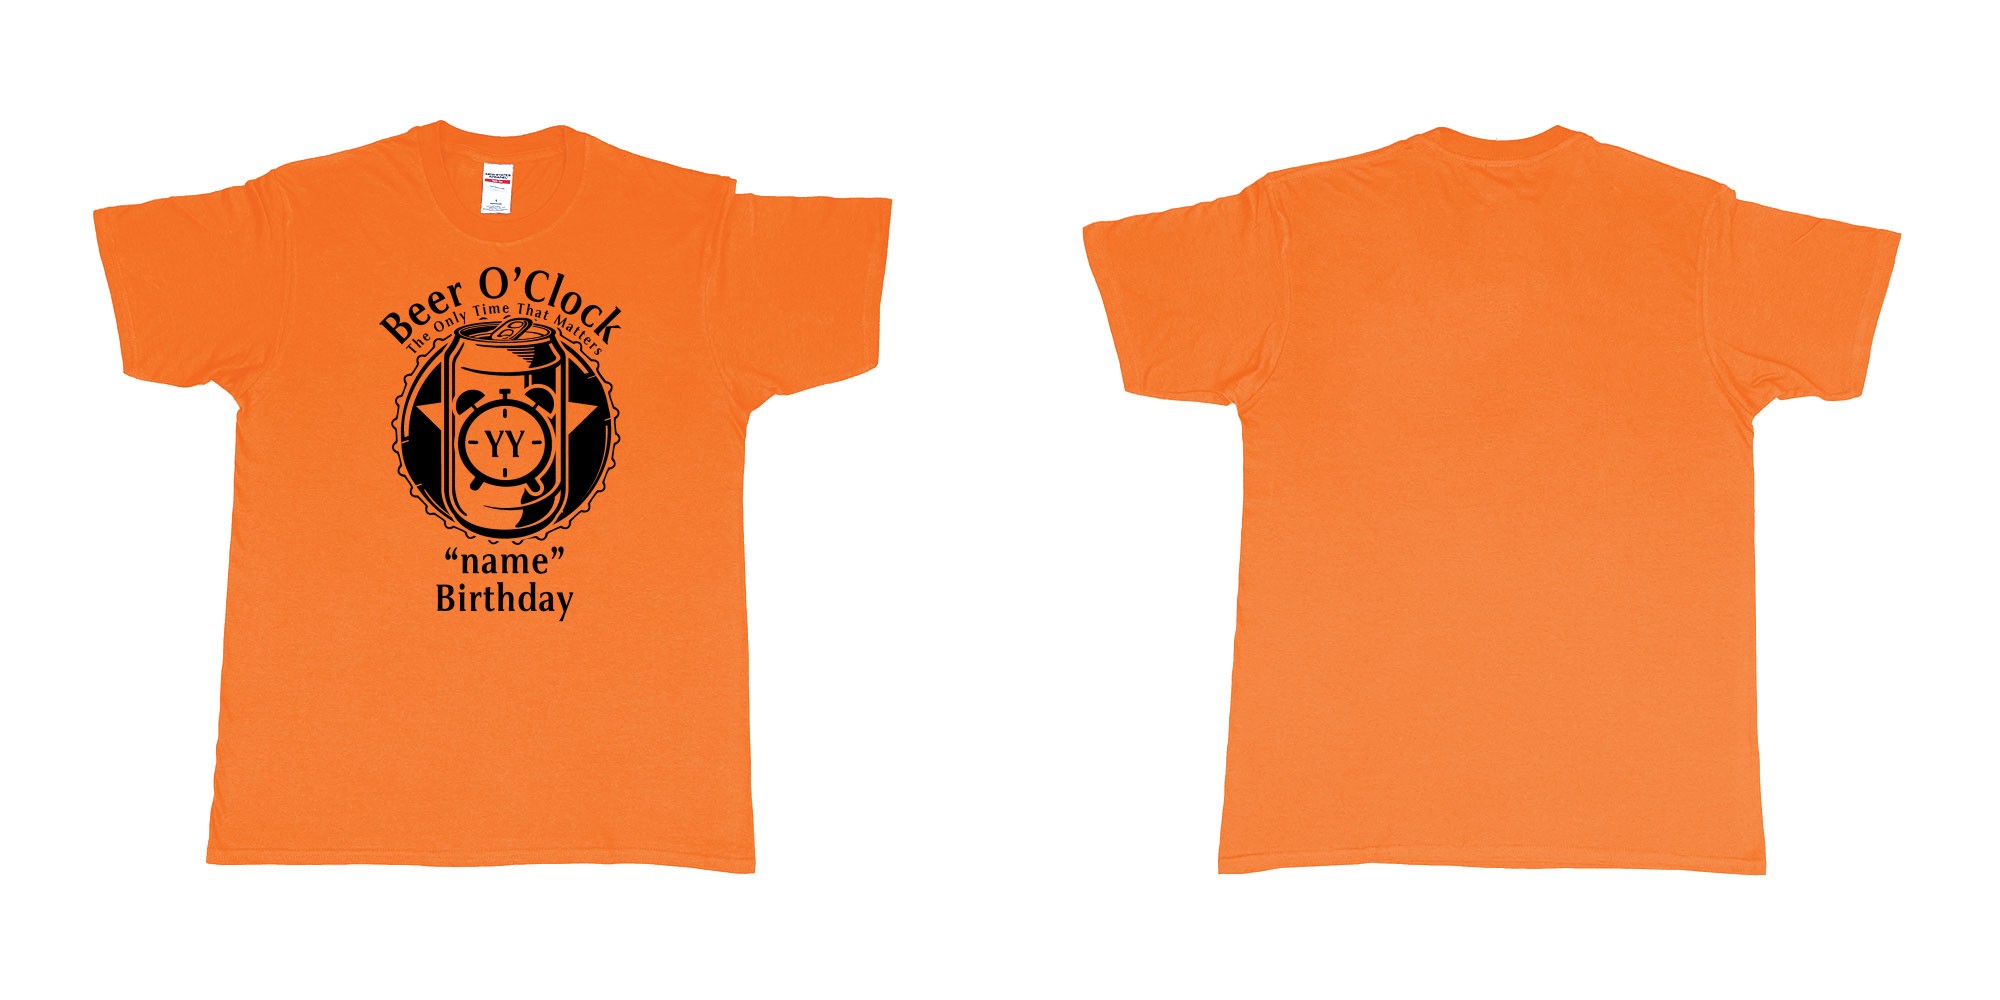 Custom tshirt design beer oclock the only time that matters custom year and names birthday bali in fabric color orange choice your own text made in Bali by The Pirate Way